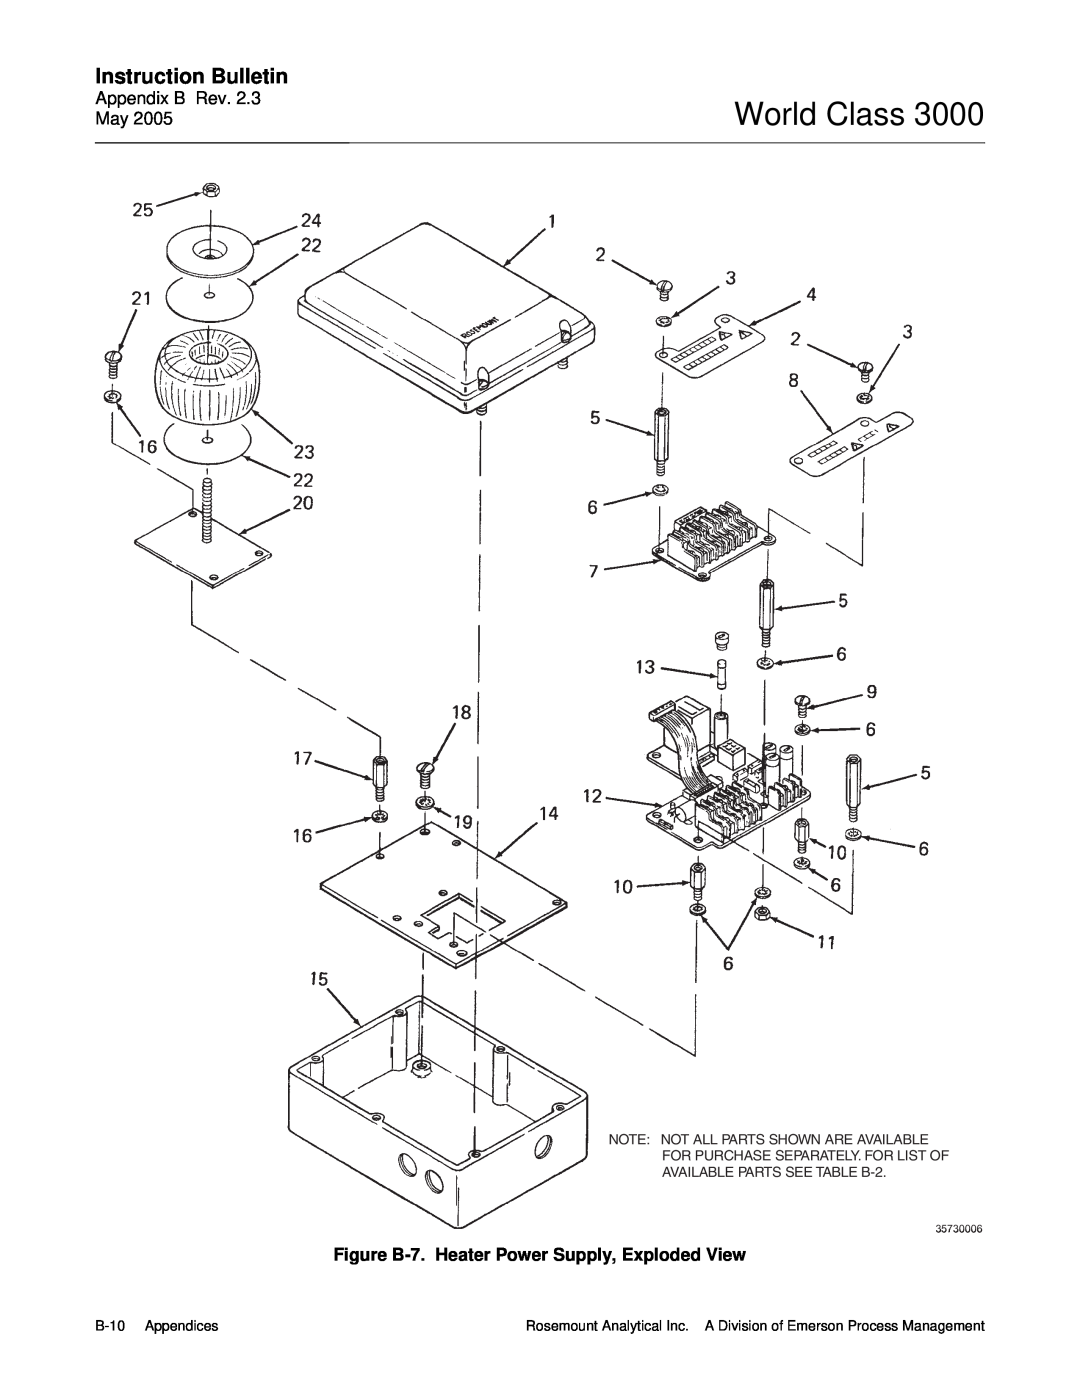 Emerson 3000 World Class, Instruction Bulletin, Figure B-7.Heater Power Supply, Exploded View, B-10Appendices 